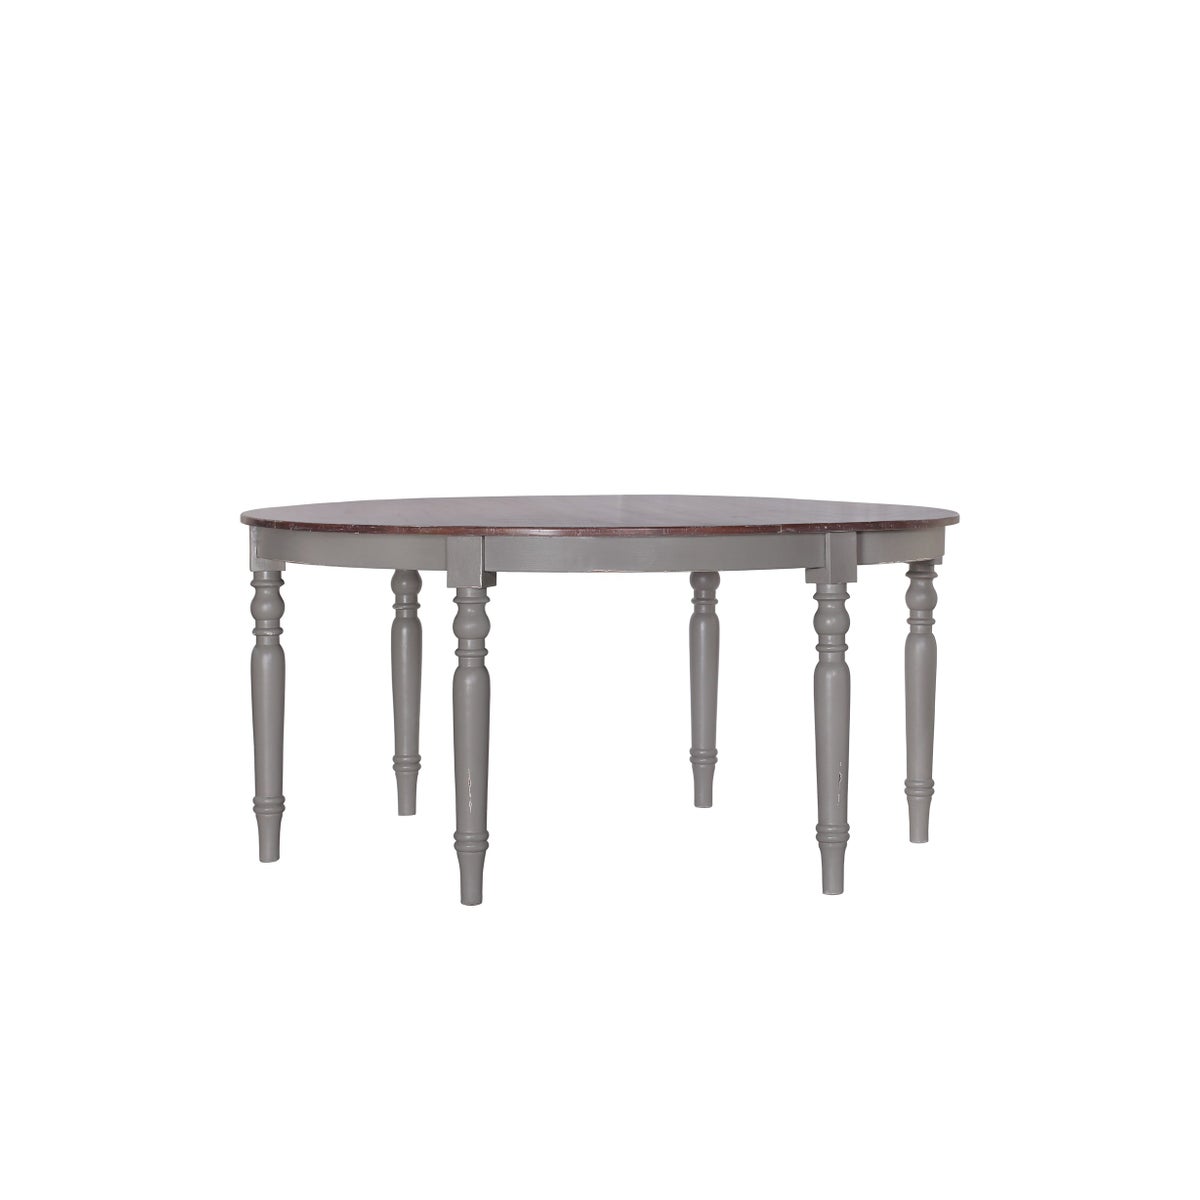 Lakehouse Dining Table, Round